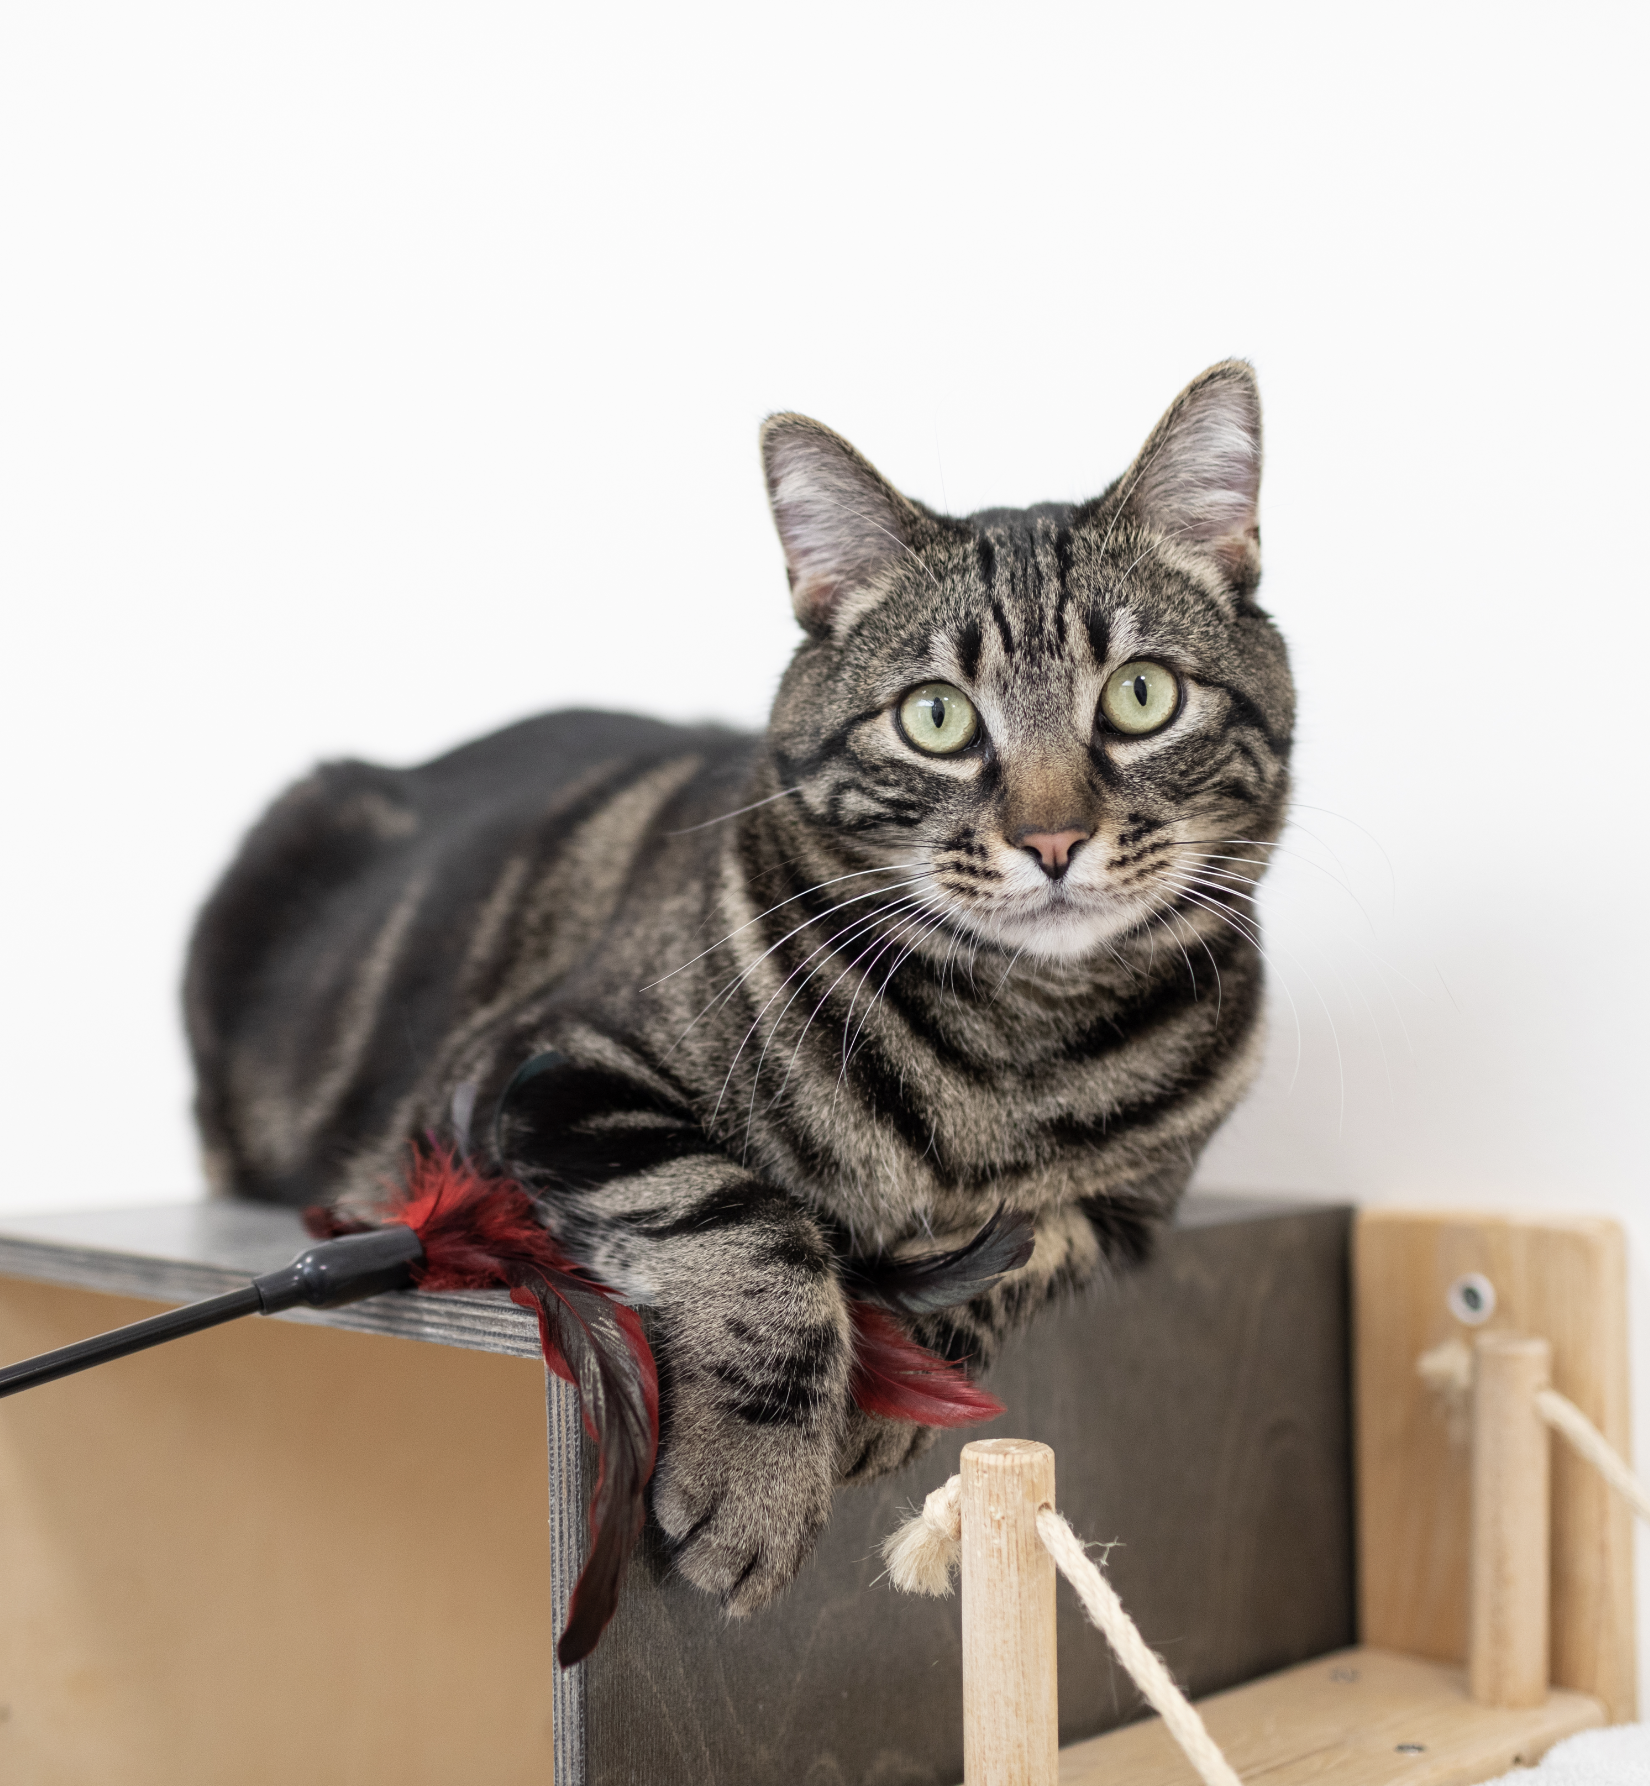 A brown tabby cat with green eyes, perching on a climbing tree, with a red feathered cat toy